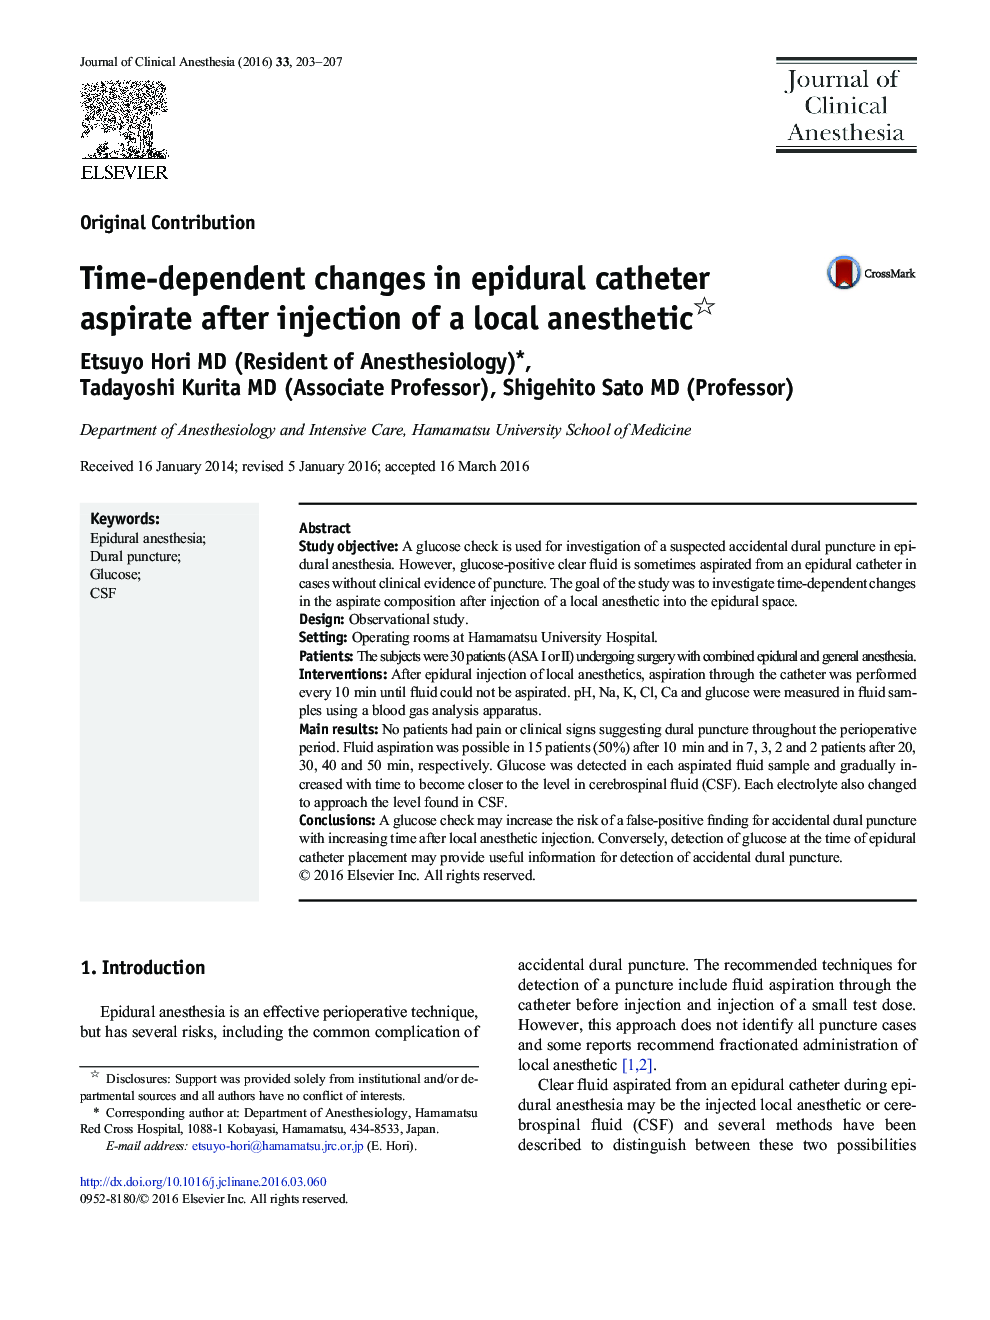 Time-dependent changes in epidural catheter aspirate after injection of a local anesthetic 